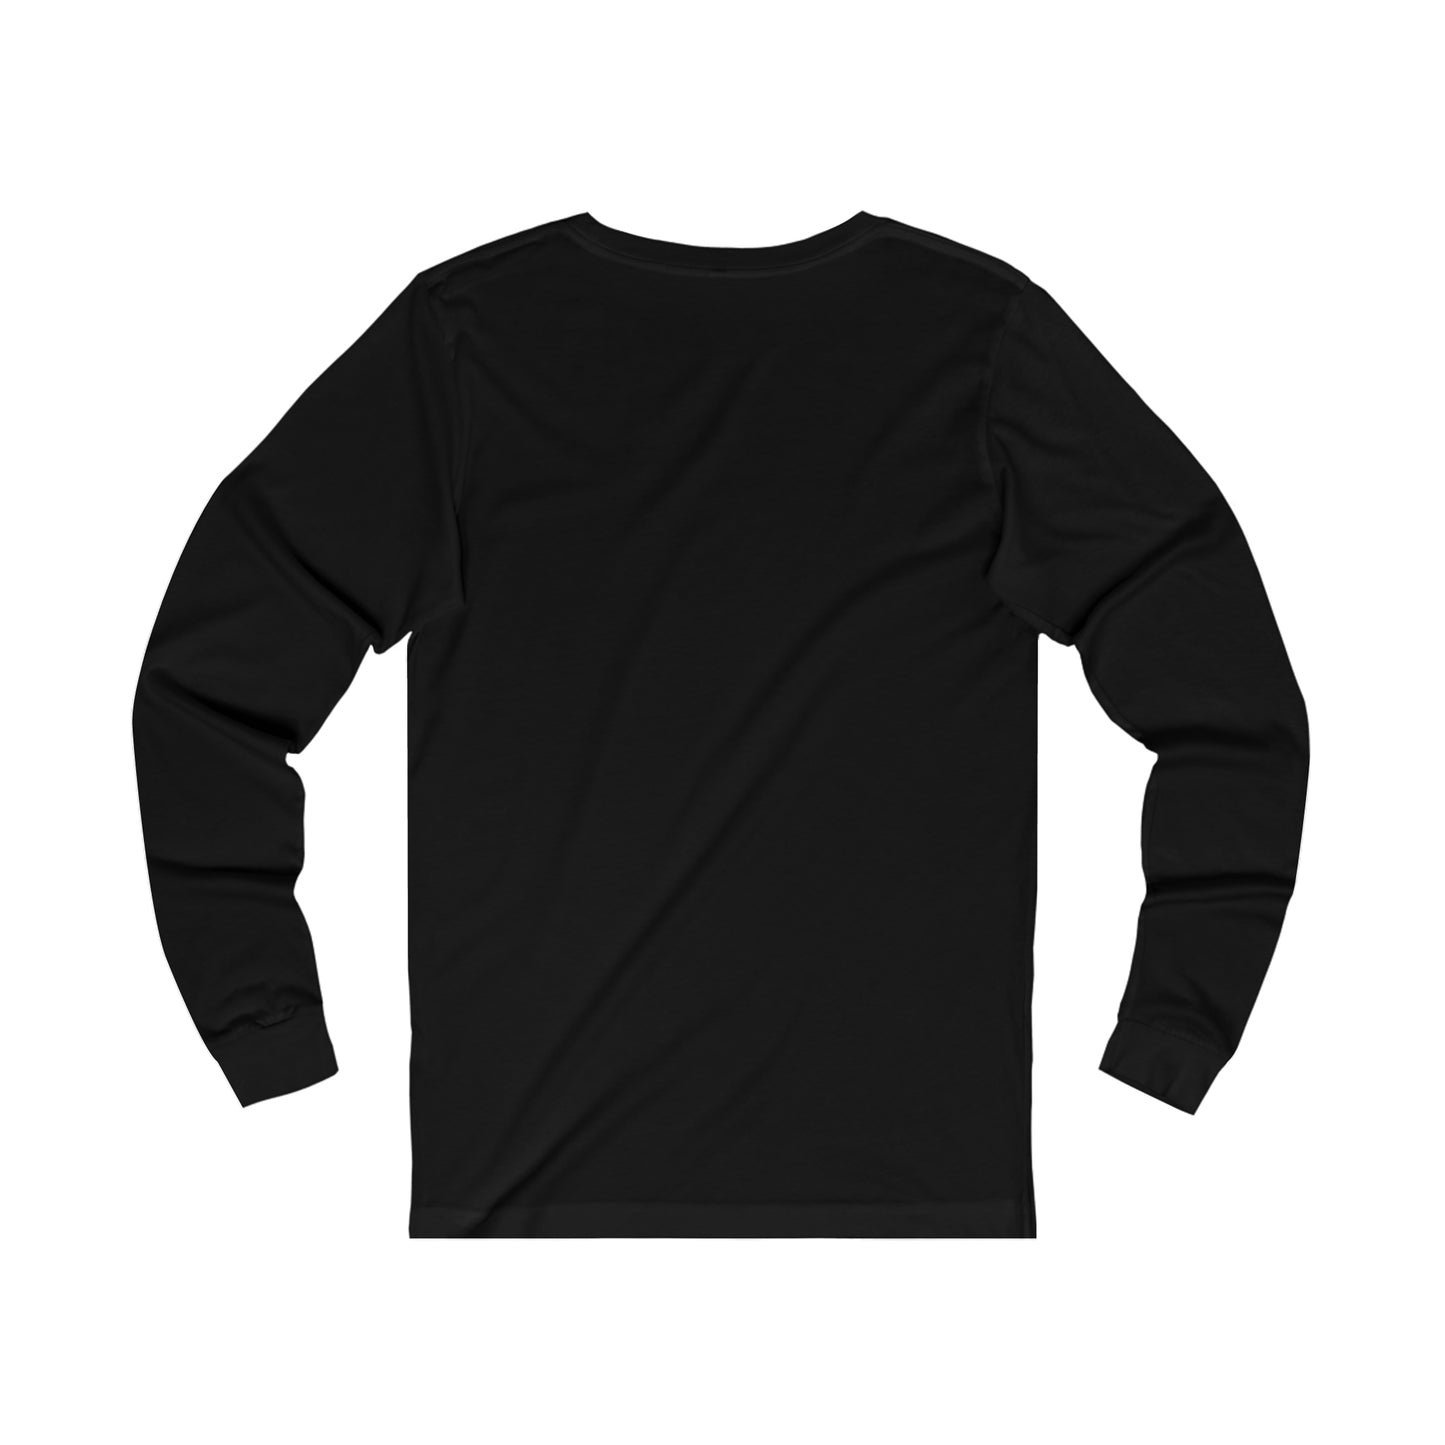 A Dying Wish - Unisex Jersey Long Sleeve Tee